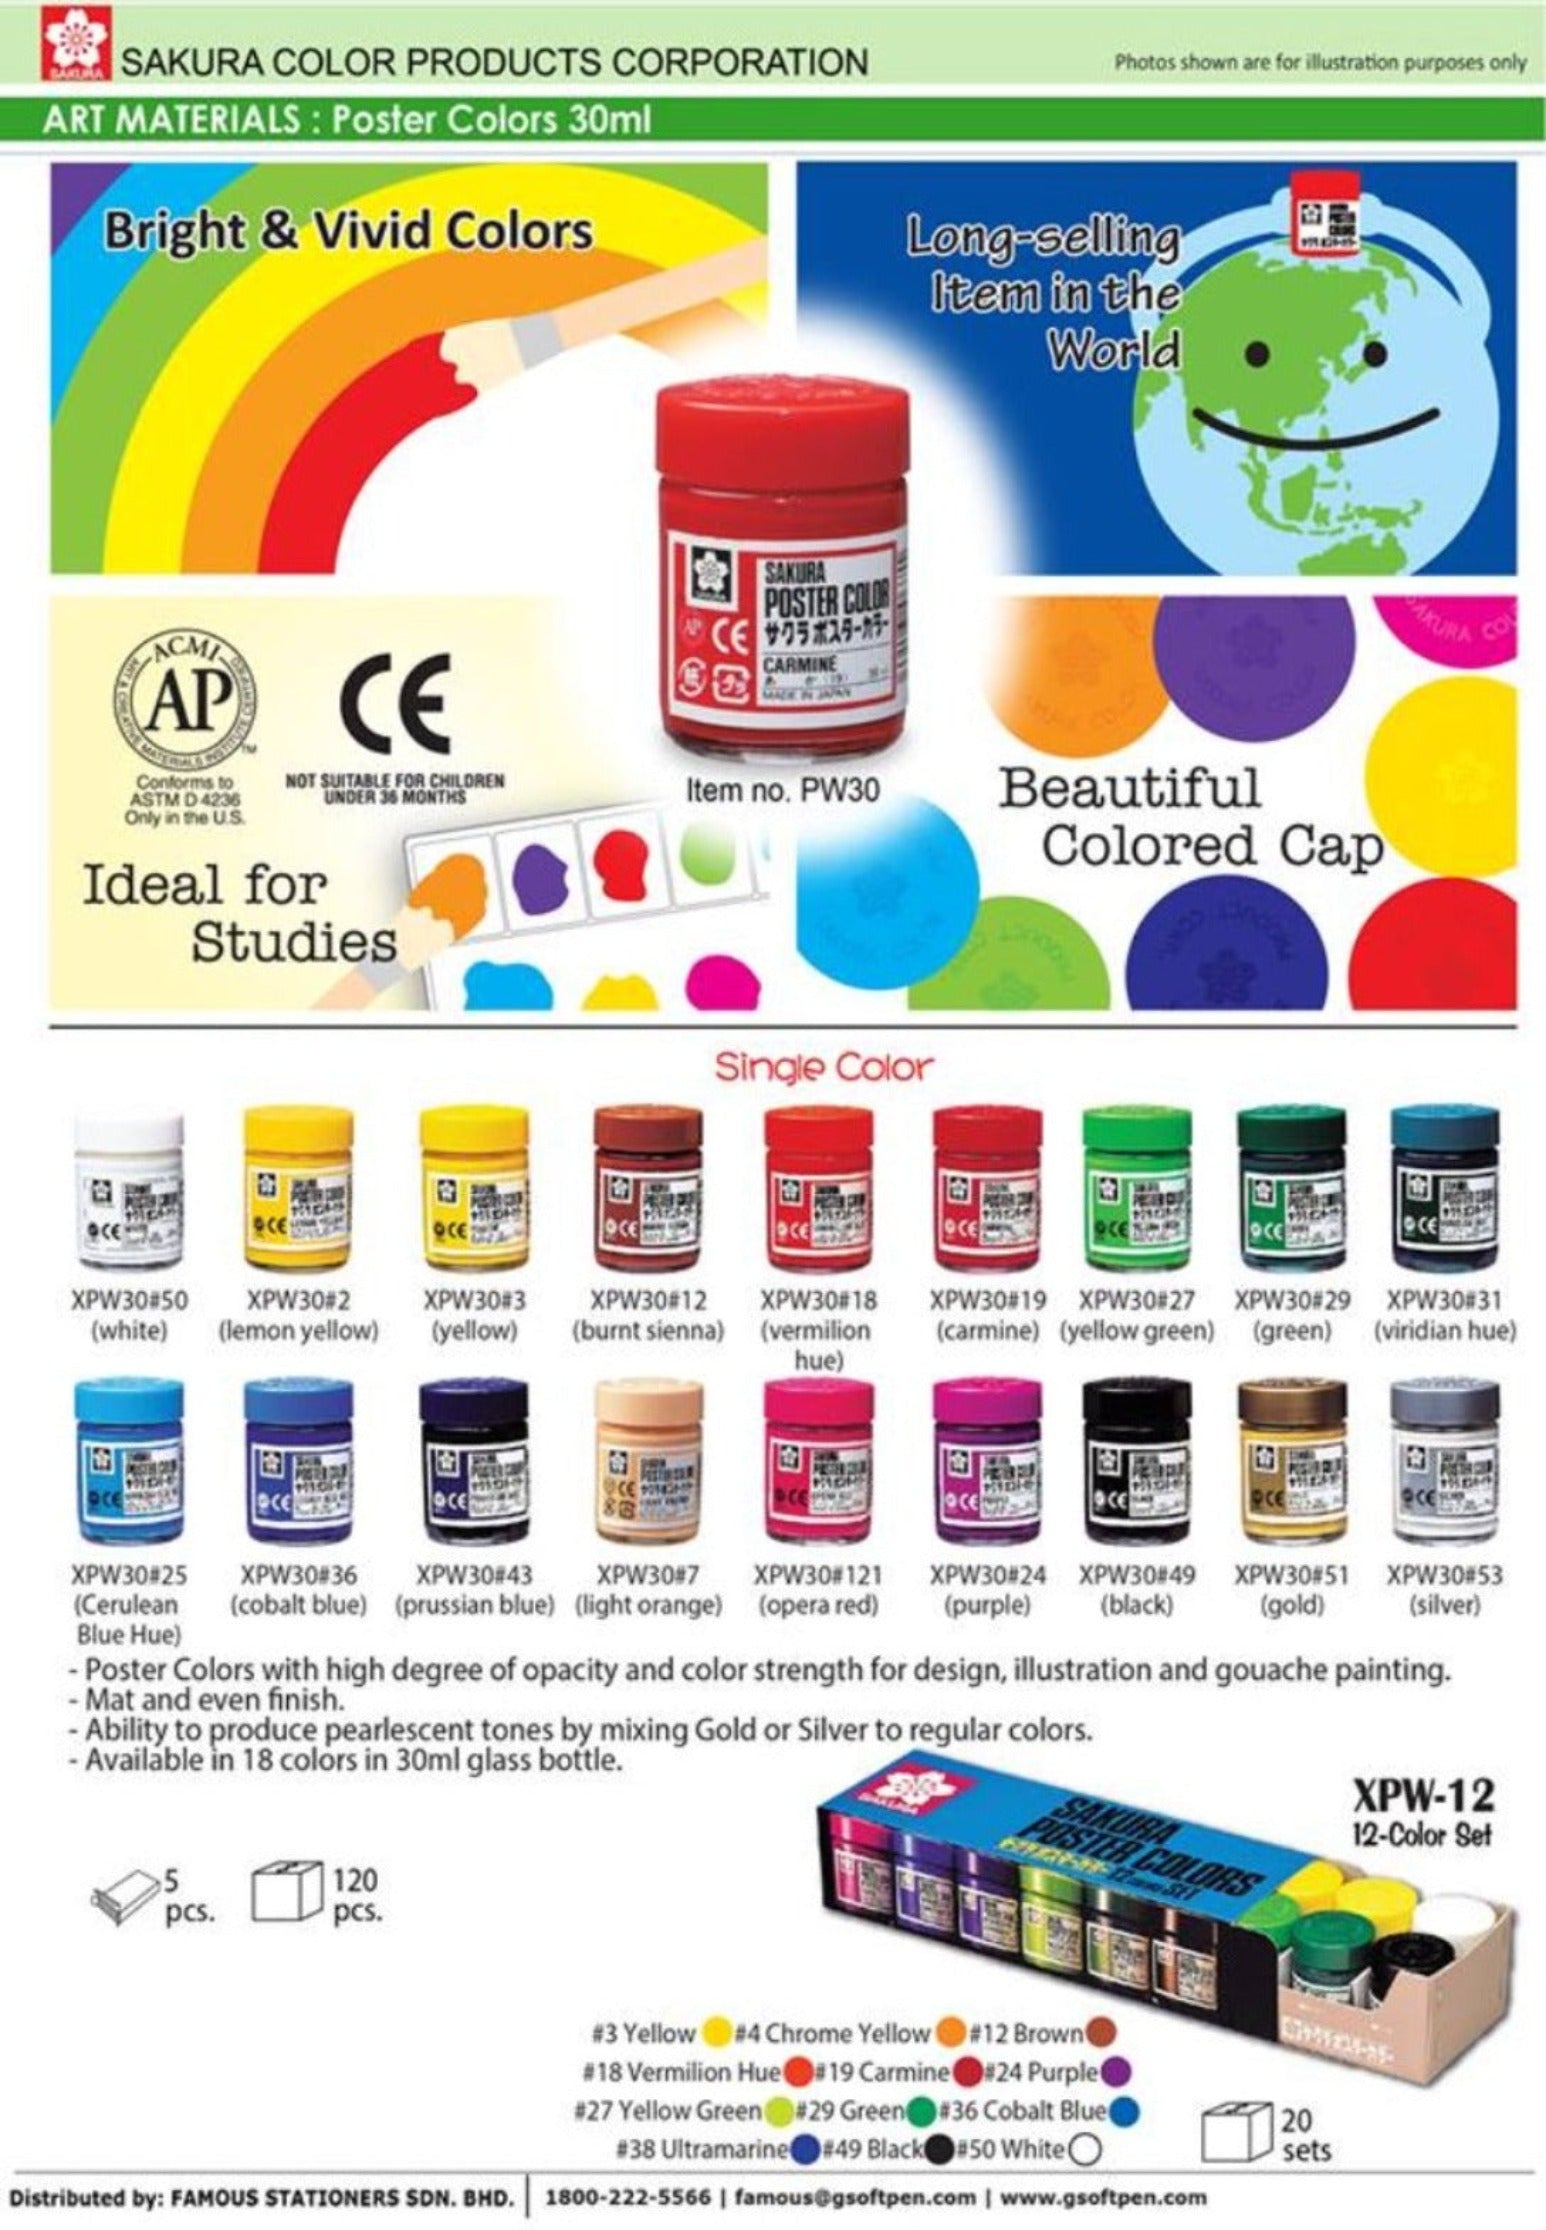 POSTER COLORS IN GLASS BOTTLE｜SAKURA COLOR PRODUCTS CORP.